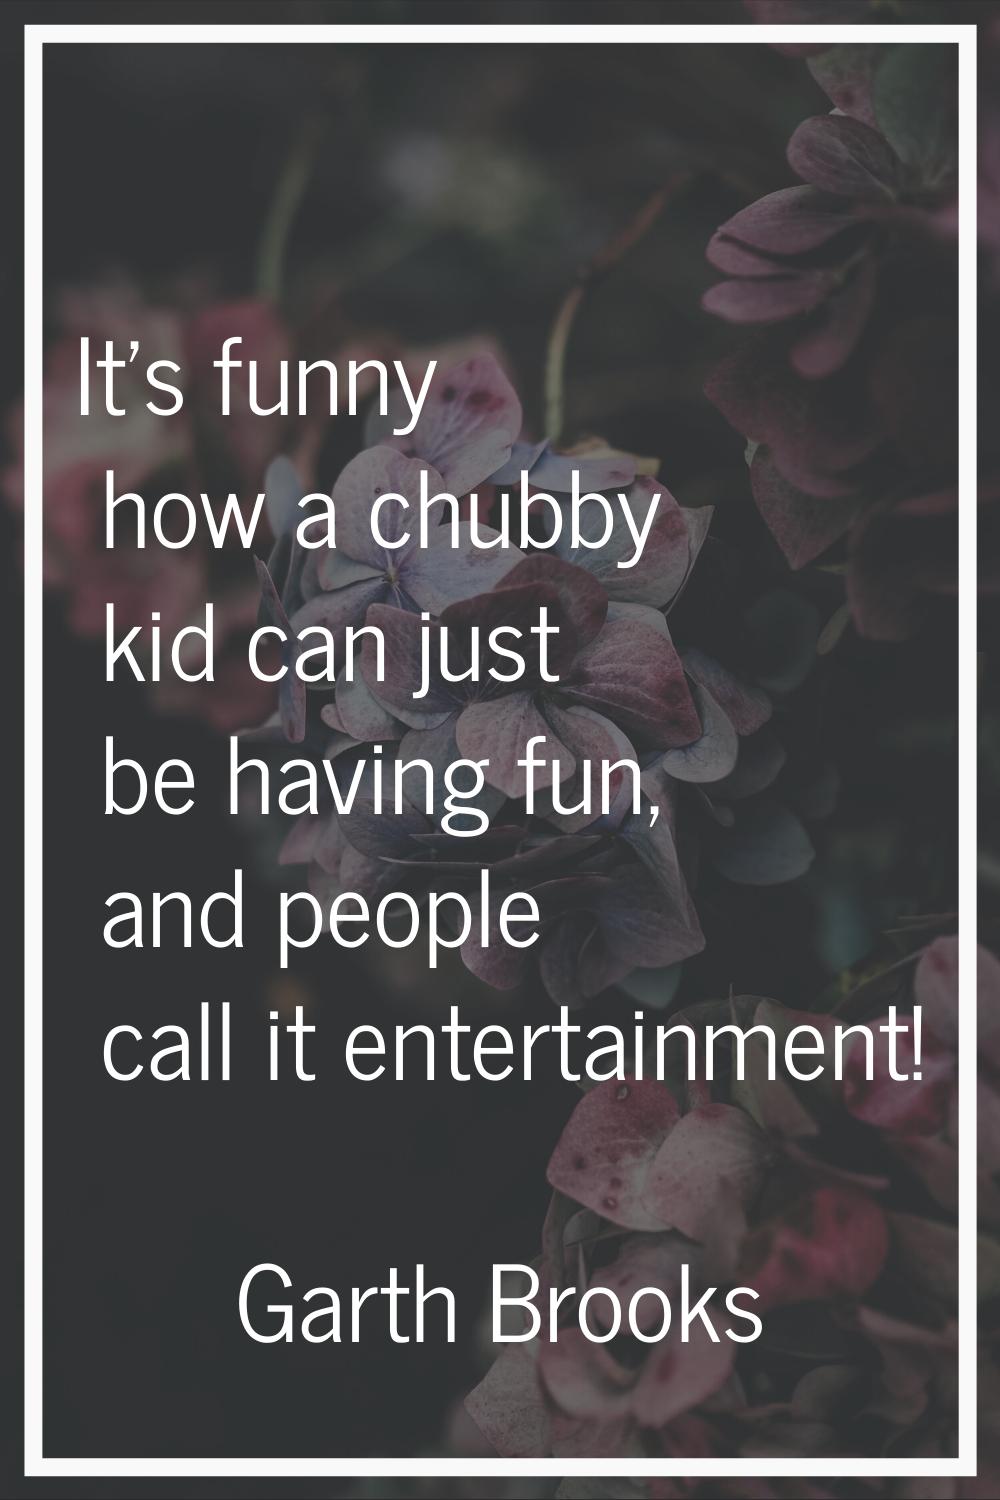 It's funny how a chubby kid can just be having fun, and people call it entertainment!